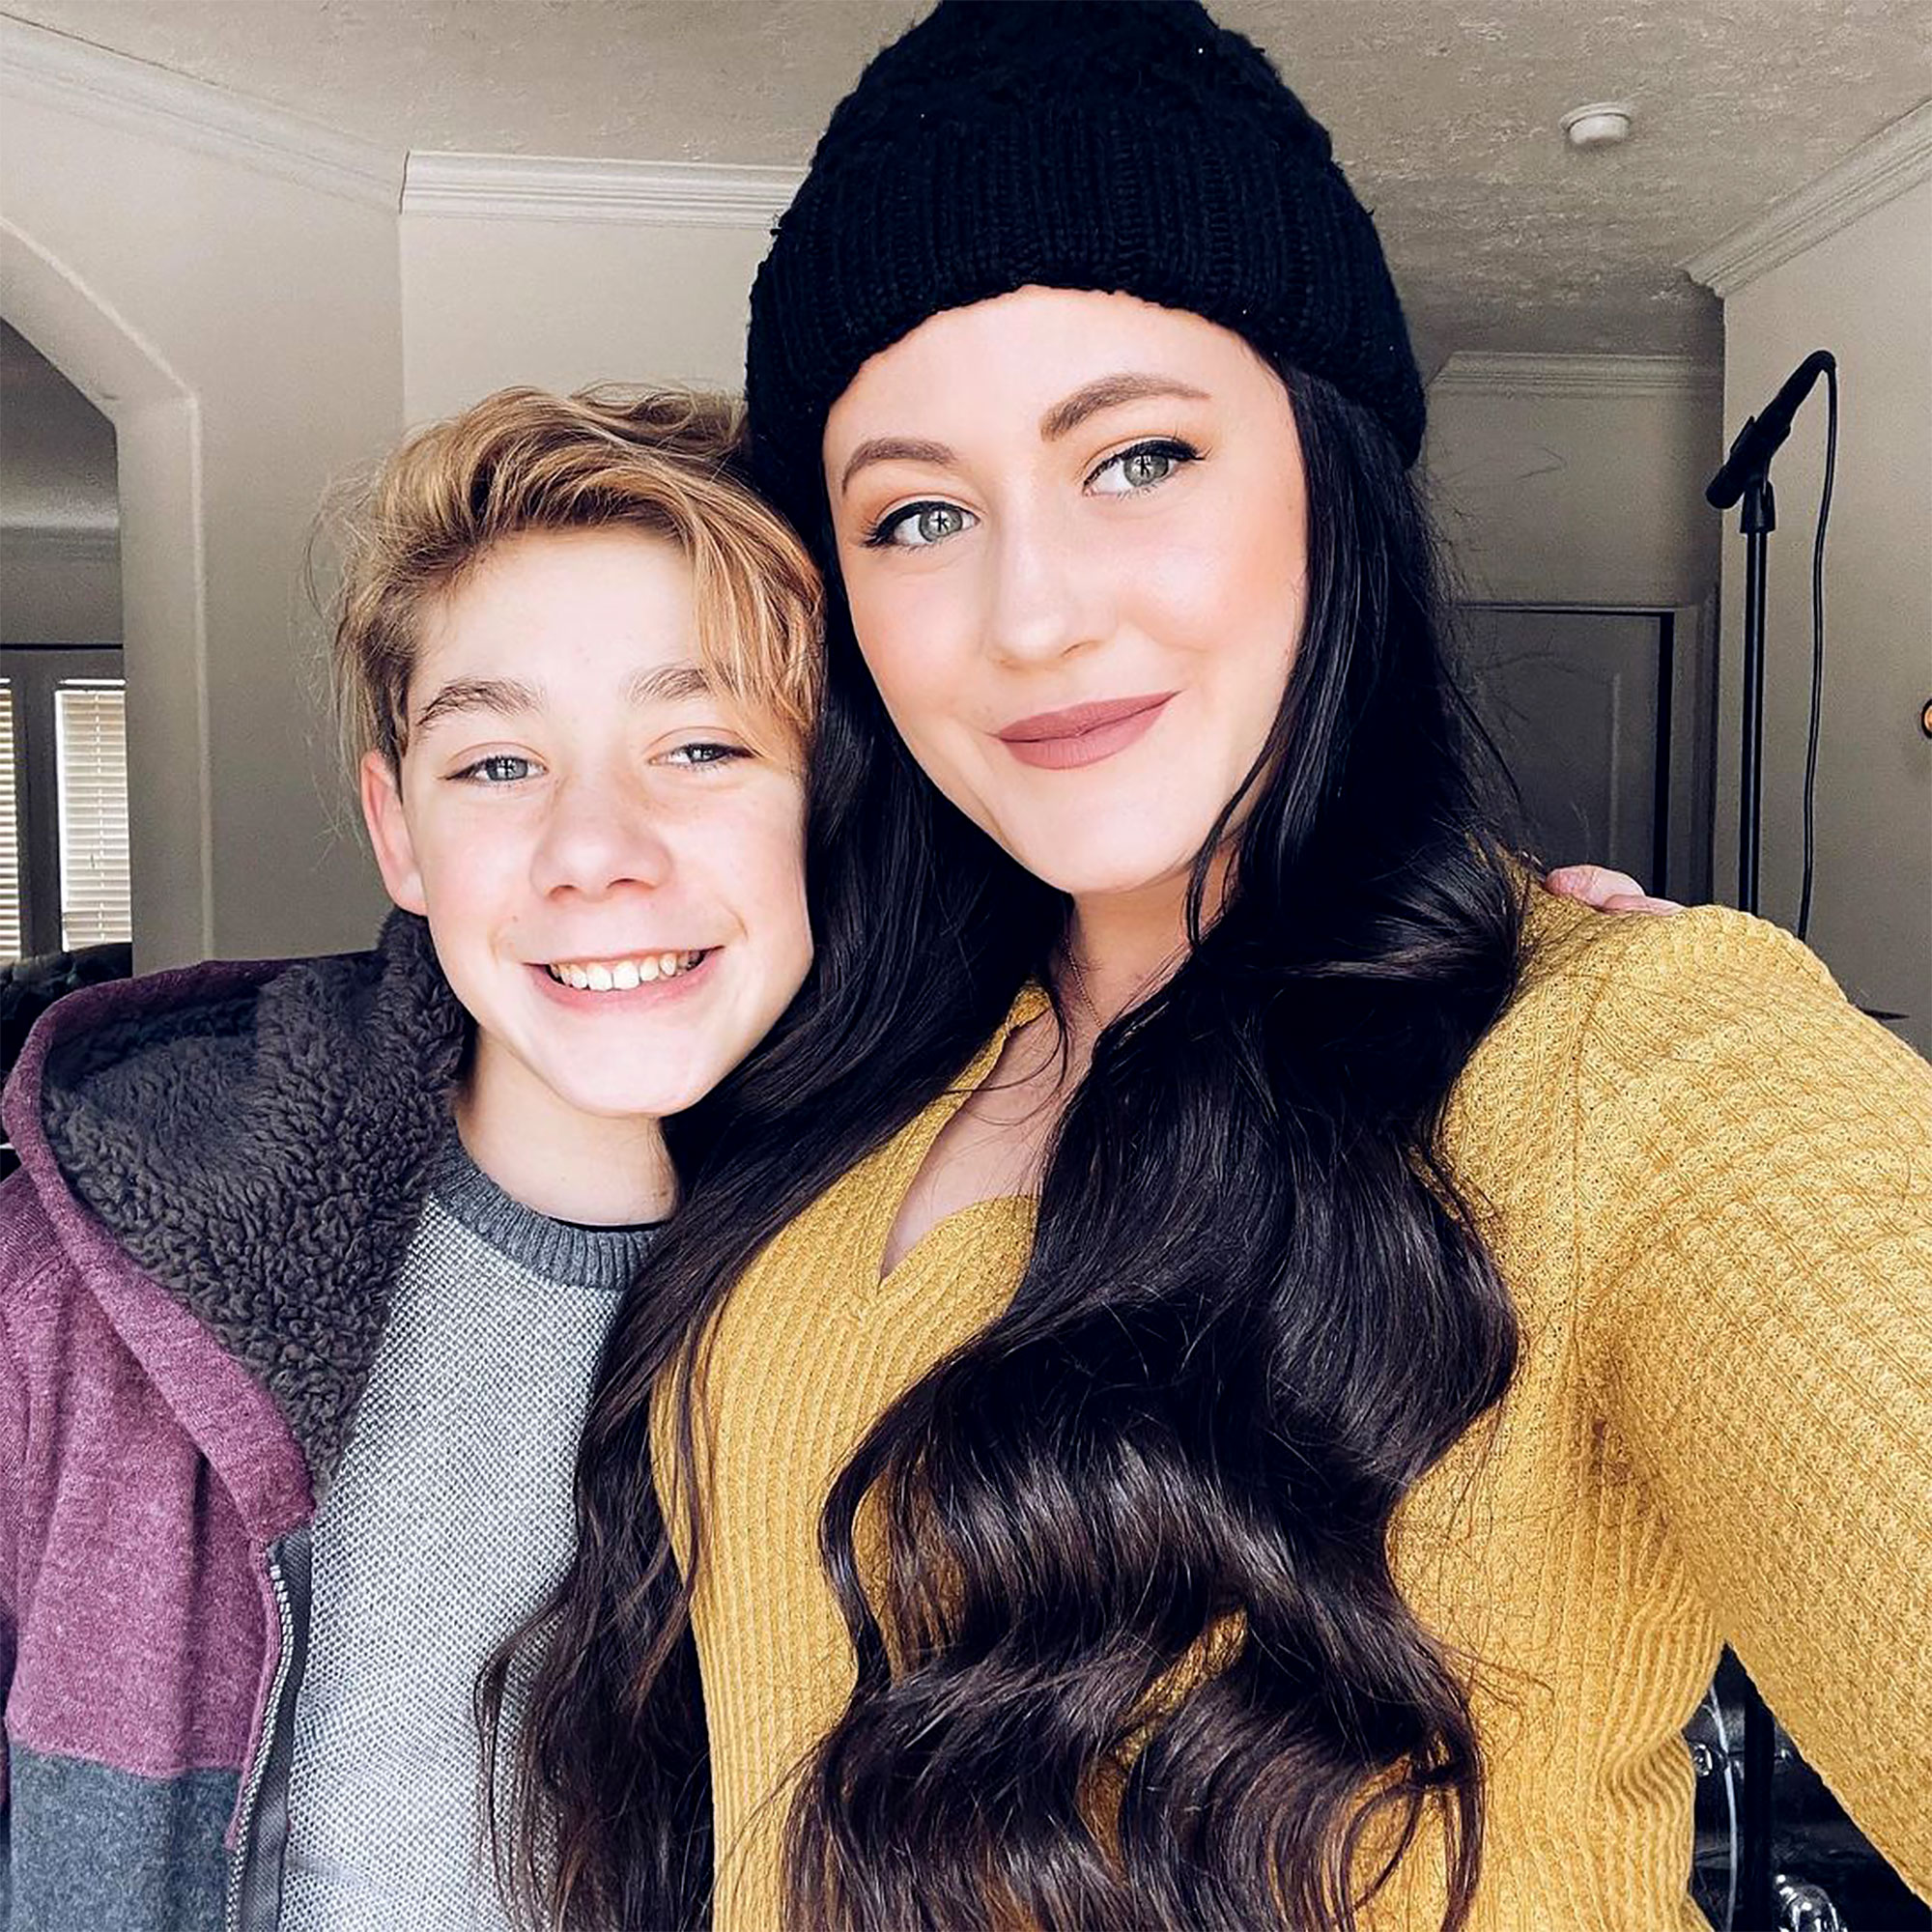 Teen Mom 2s Jenelle Evans Son Jace, 12, Looks Grown Up New Photos Porn Pic Hd